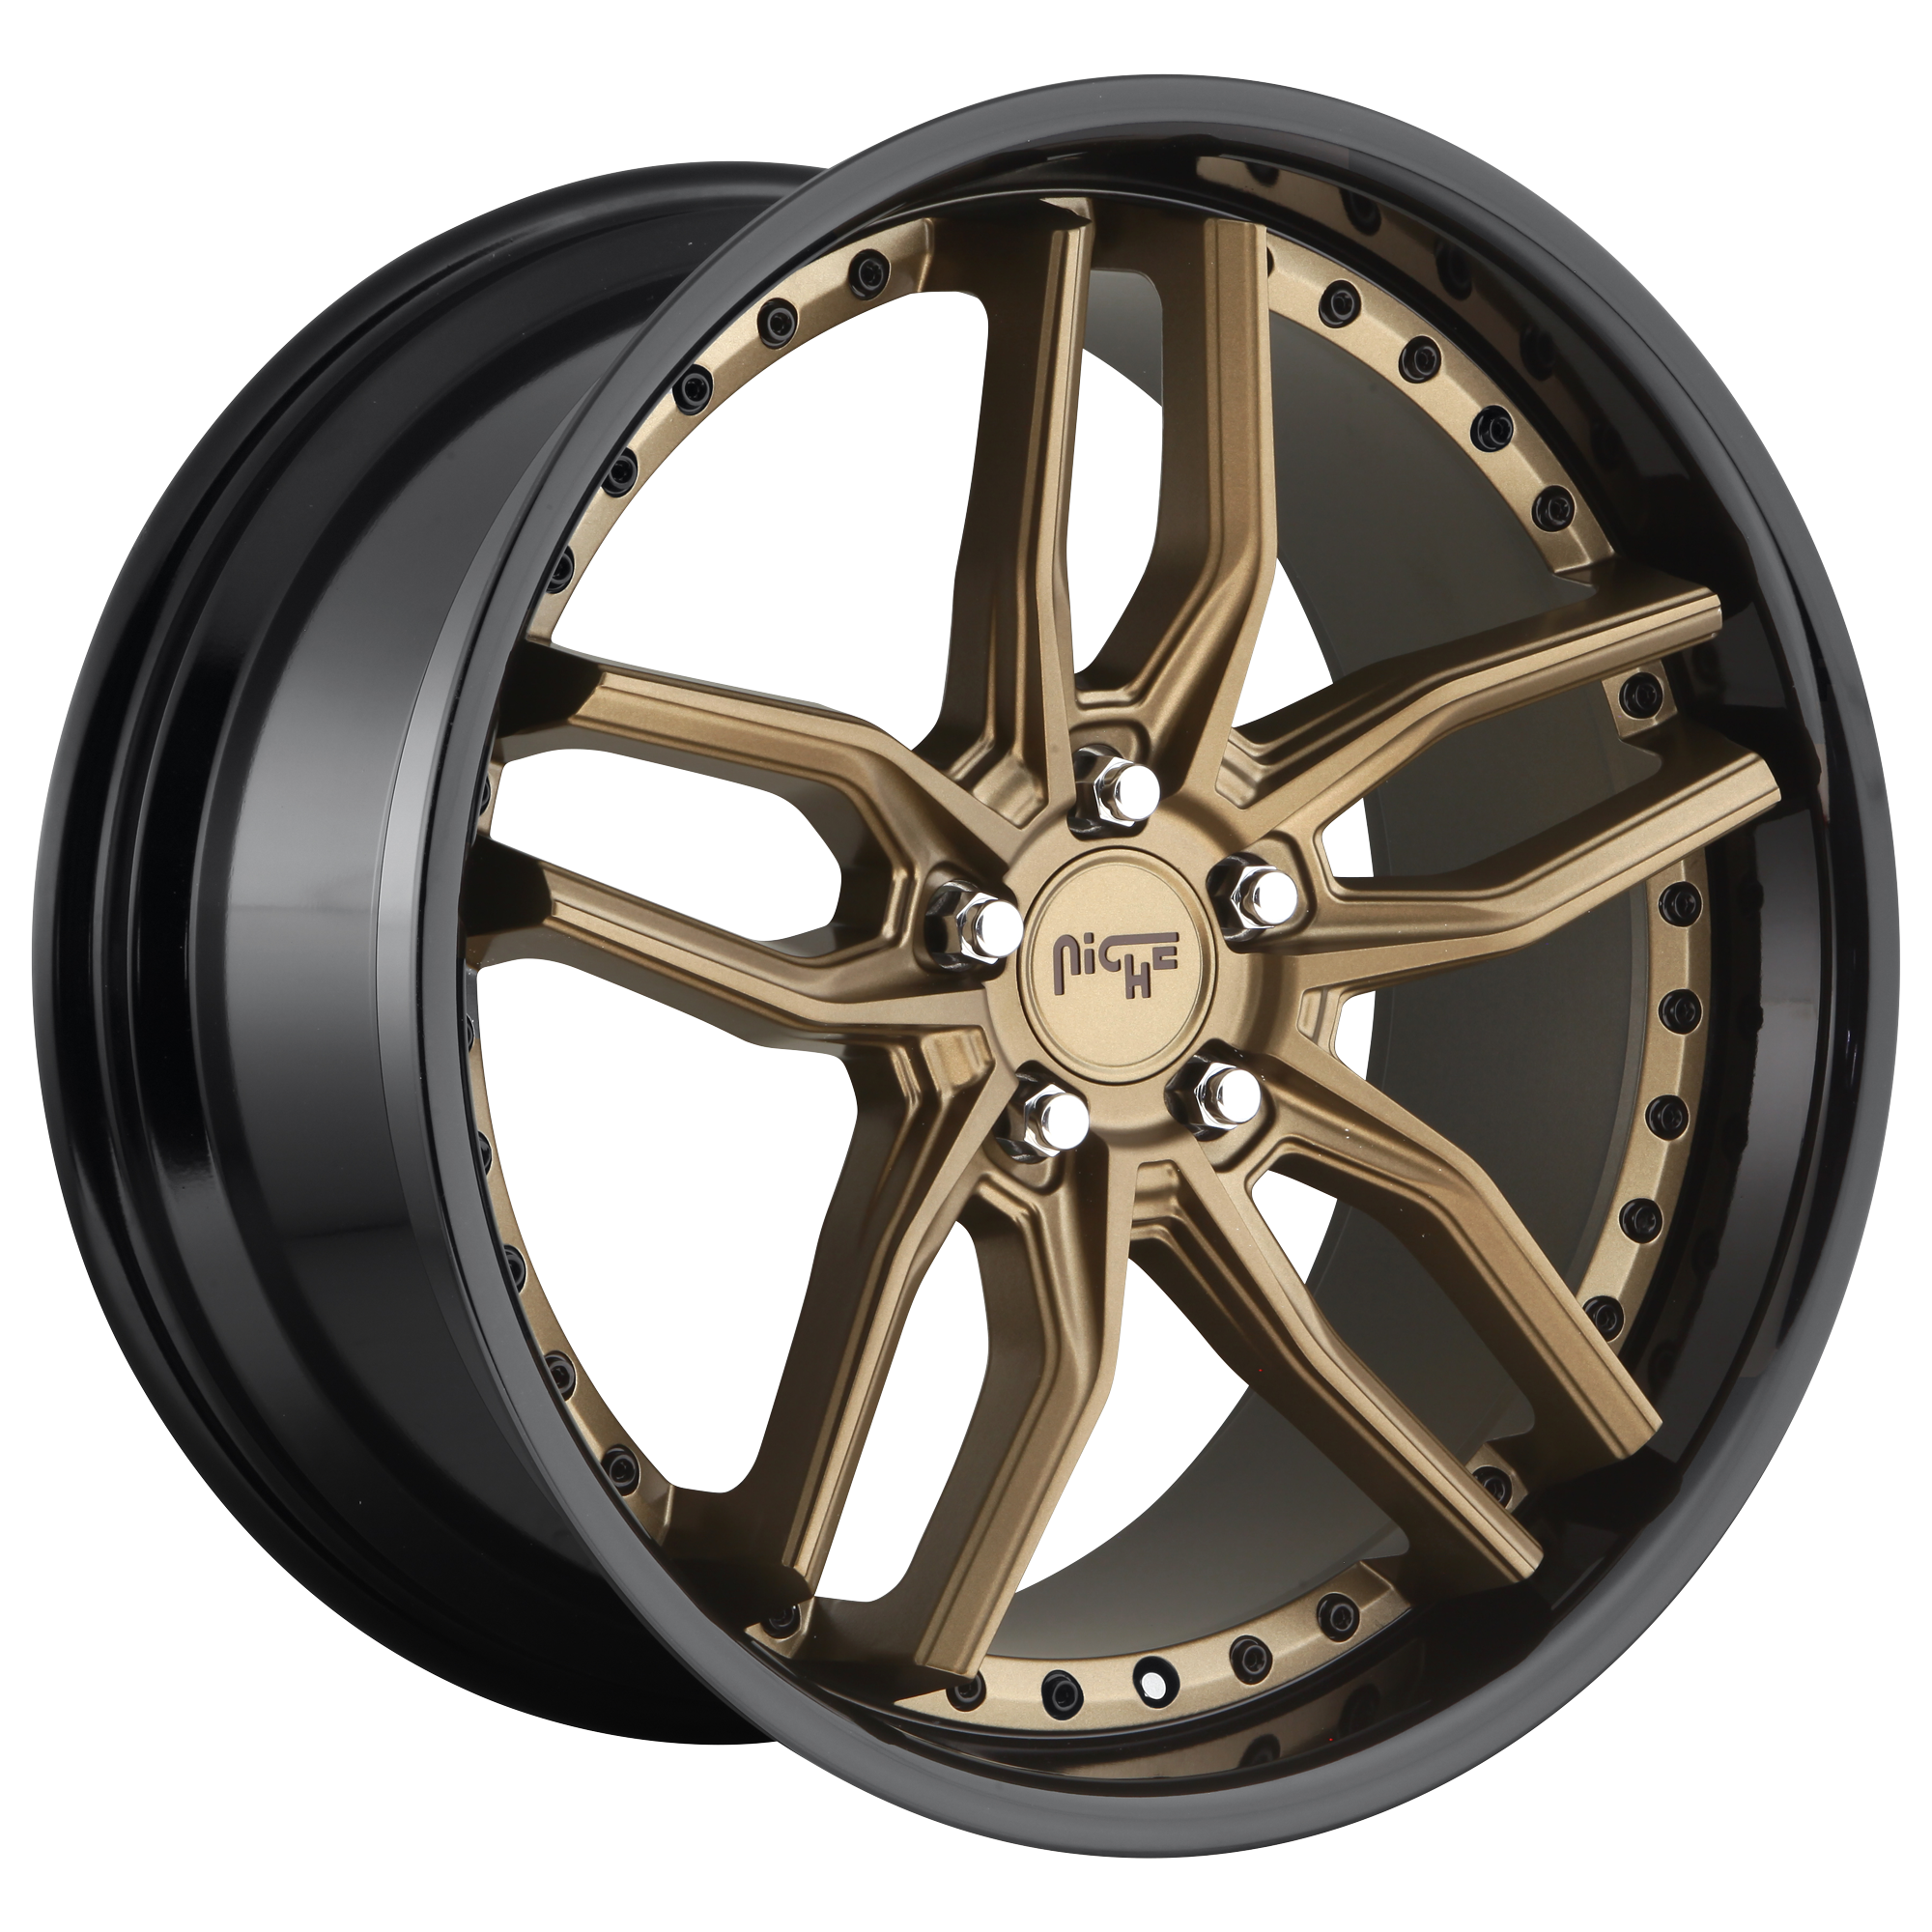 METHOS 20x9 5x112.00 MATTE BRONZE BLACK BEAD RING (27 mm) - Tires and Engine Performance